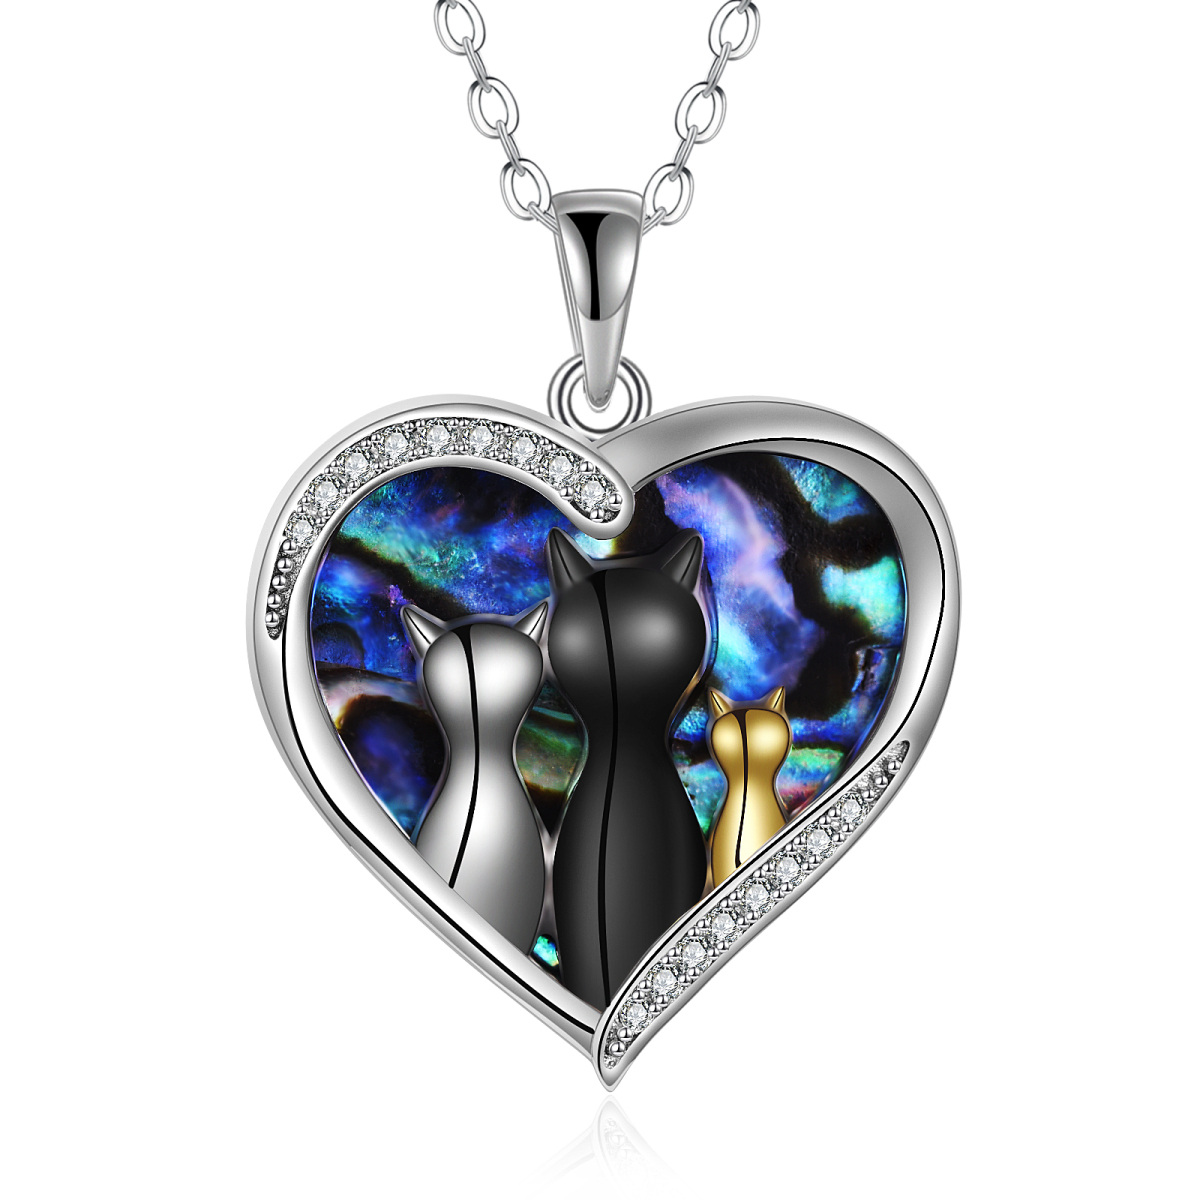 Sterling Silver Tri-tone Circular Shaped & Heart Shaped Abalone Shellfish & Cubic Zirconia Cat & Heart Pendant Necklace-1